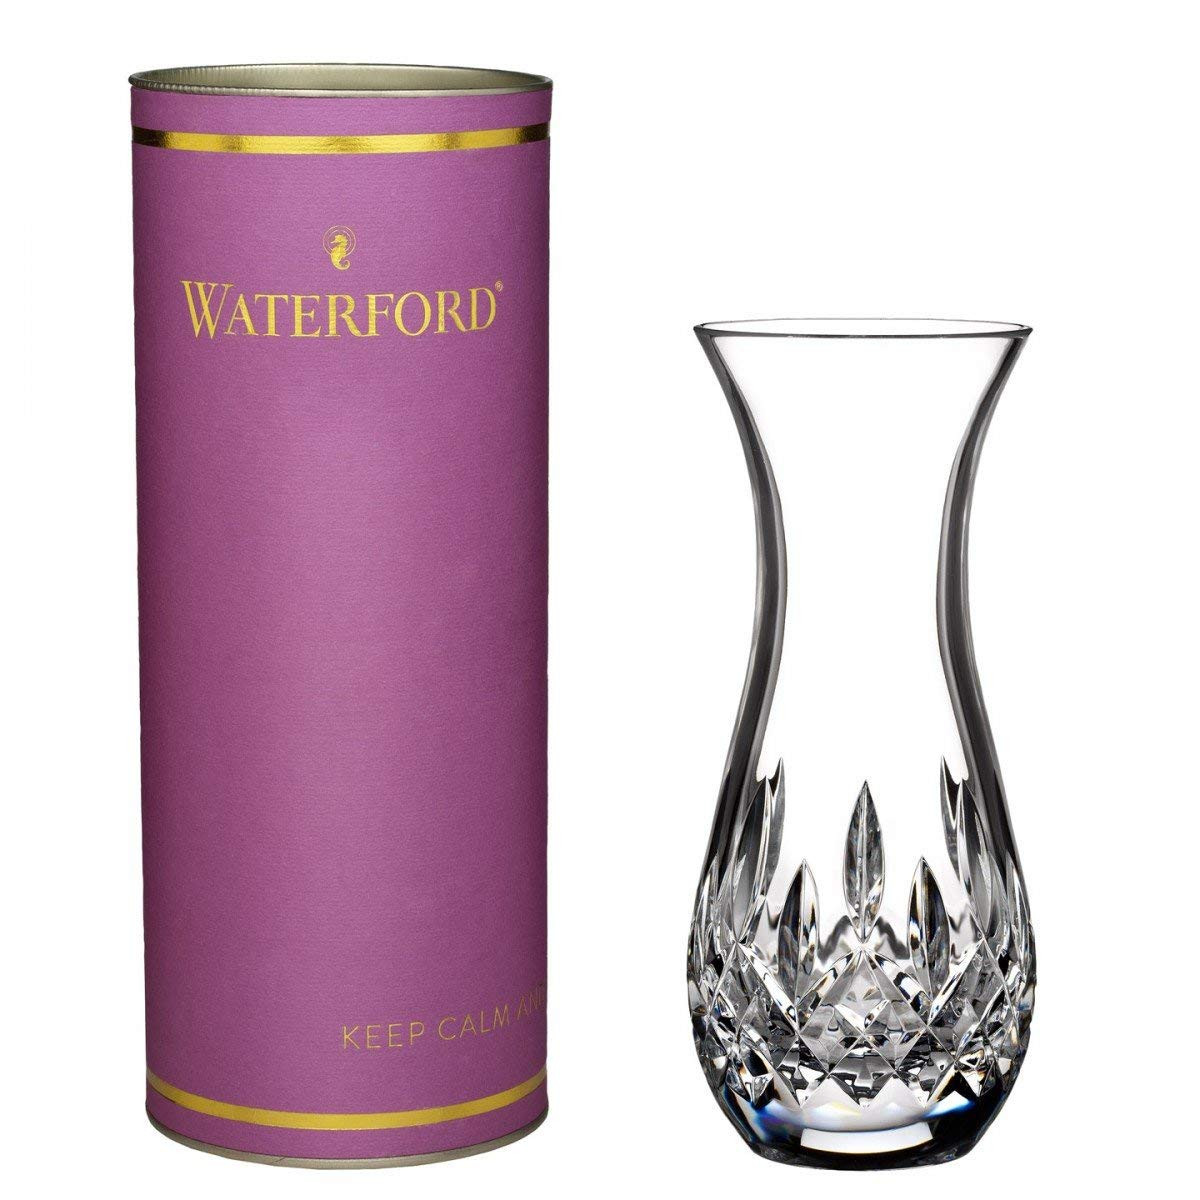 14 attractive Waterford Markham Vase 2024 free download waterford markham vase of amazon com yankee candle waterford giftology 6 lismore sugar bud intended for amazon com yankee candle waterford giftology 6 lismore sugar bud vase home kitchen